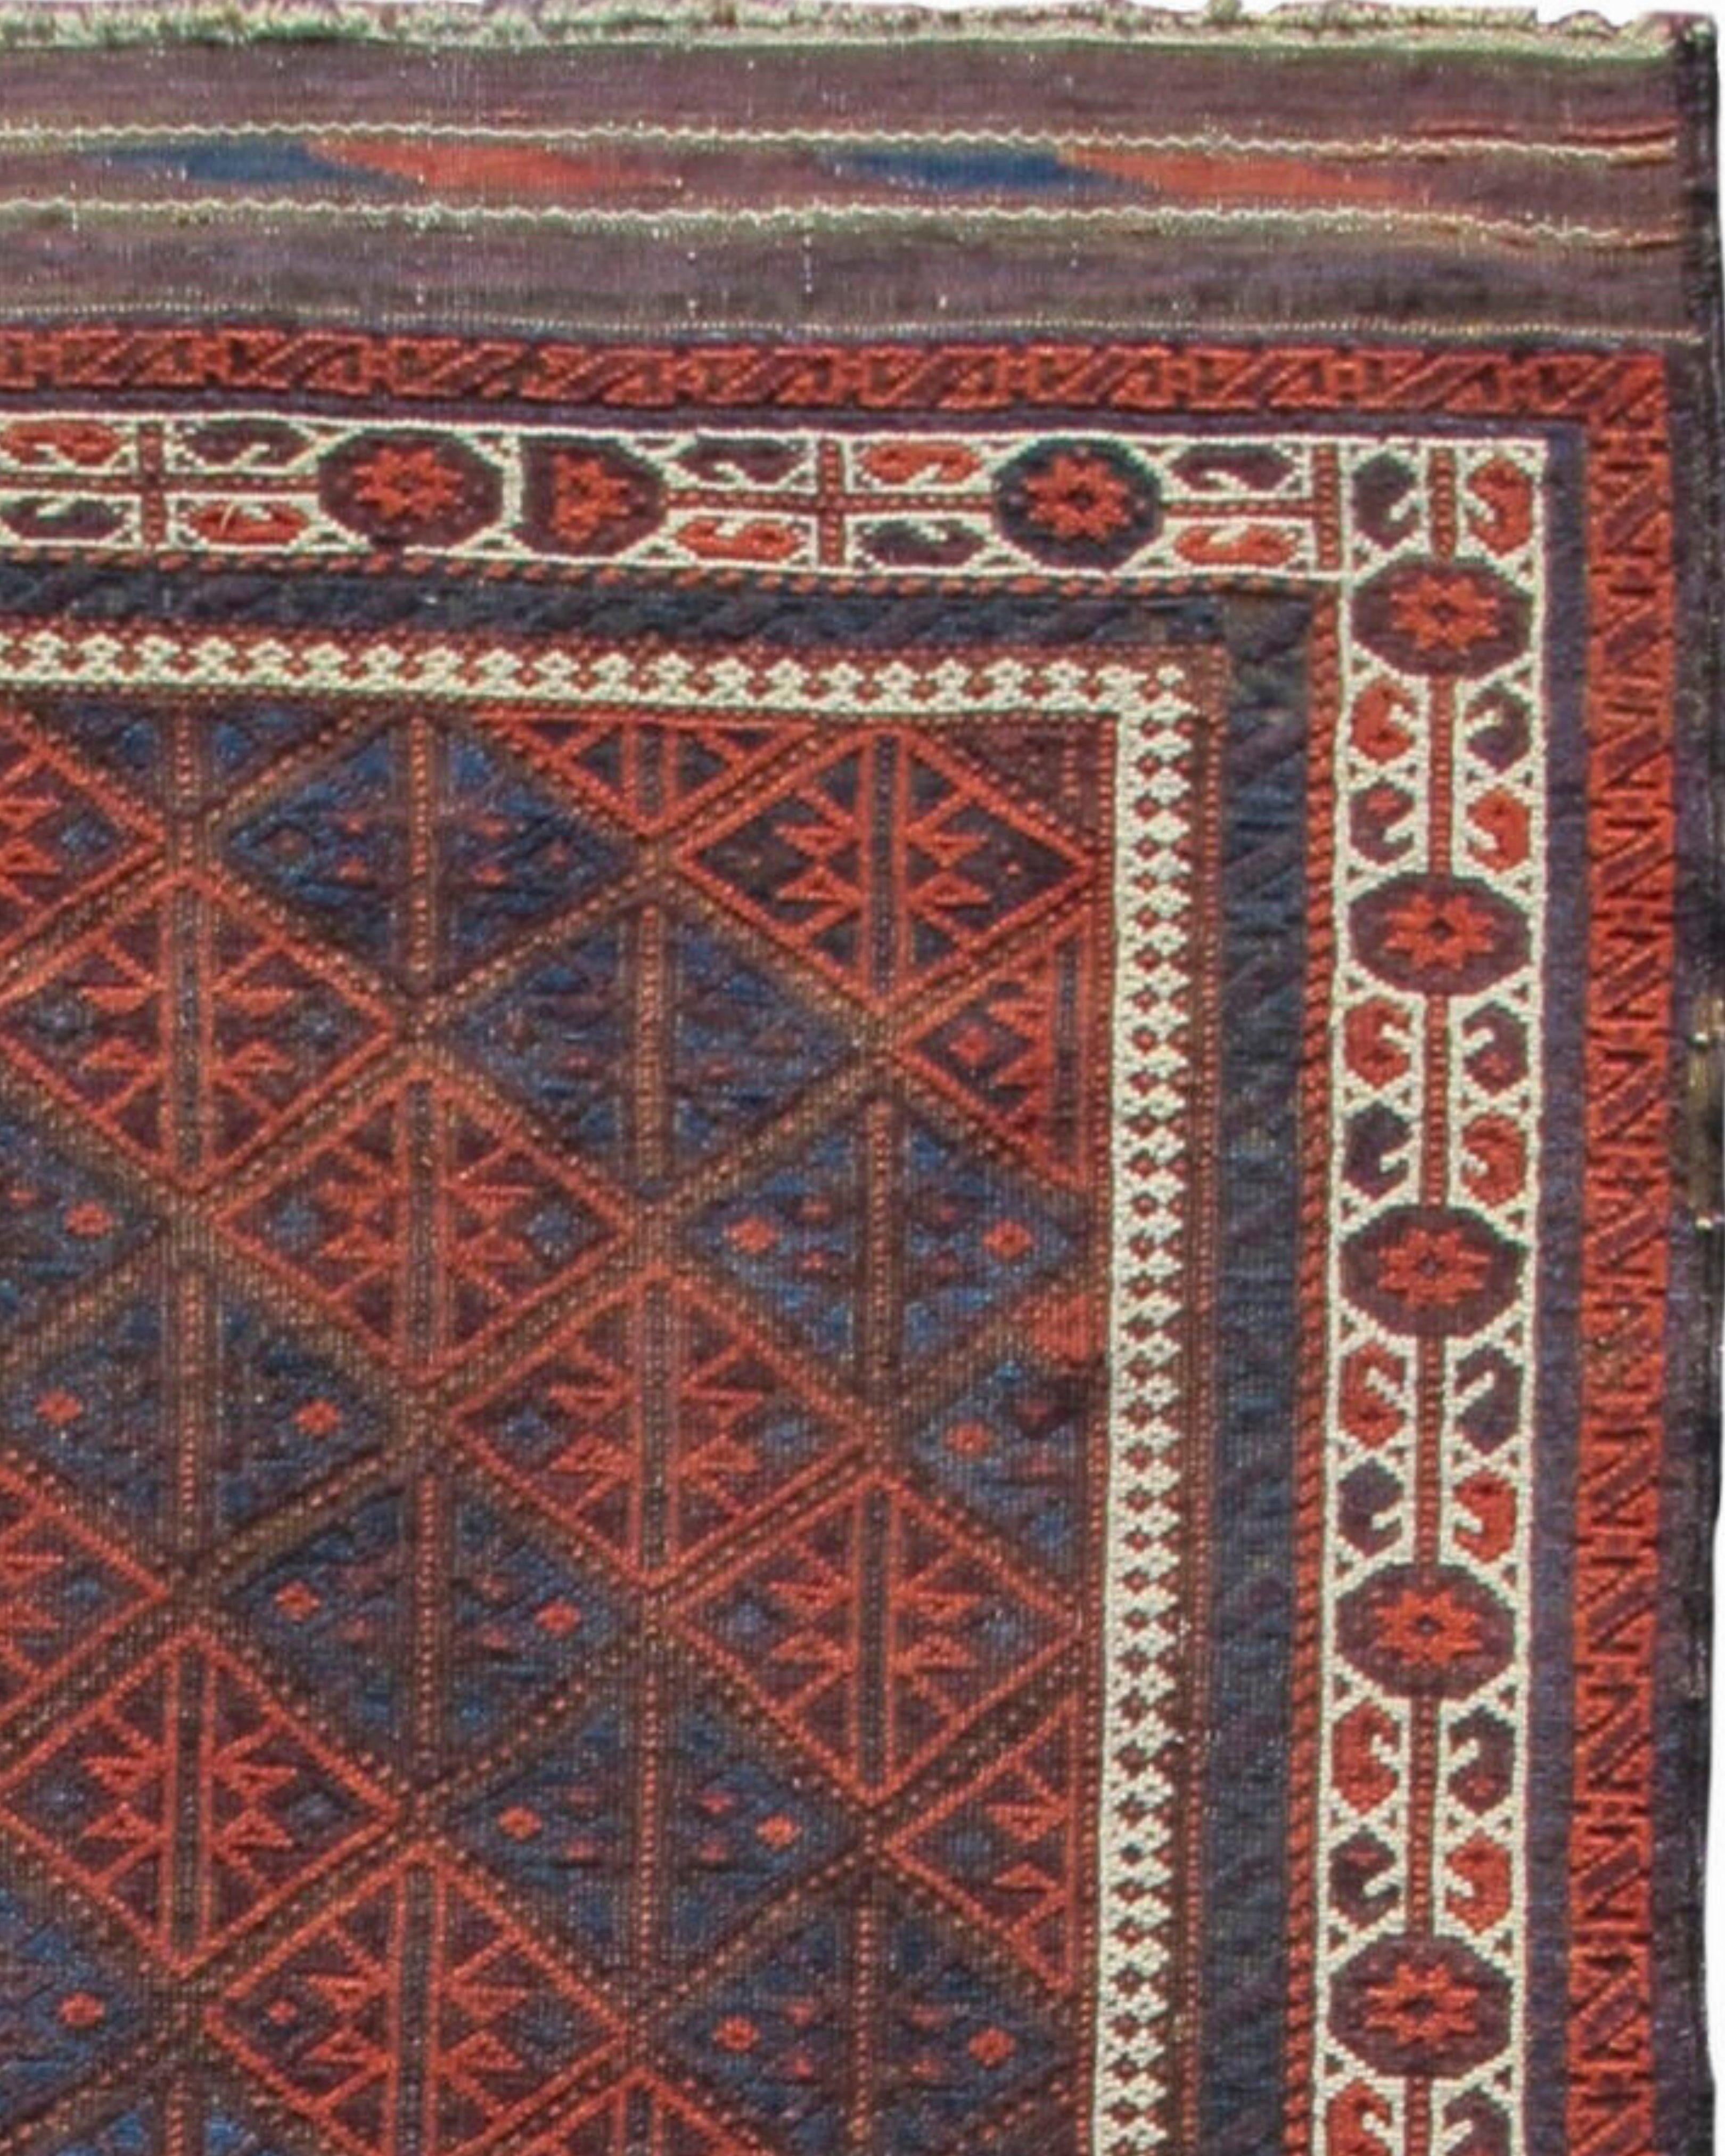 Antique Baluch Rug, Late 19th Century

Additional Information:
Dimensions: 3'1